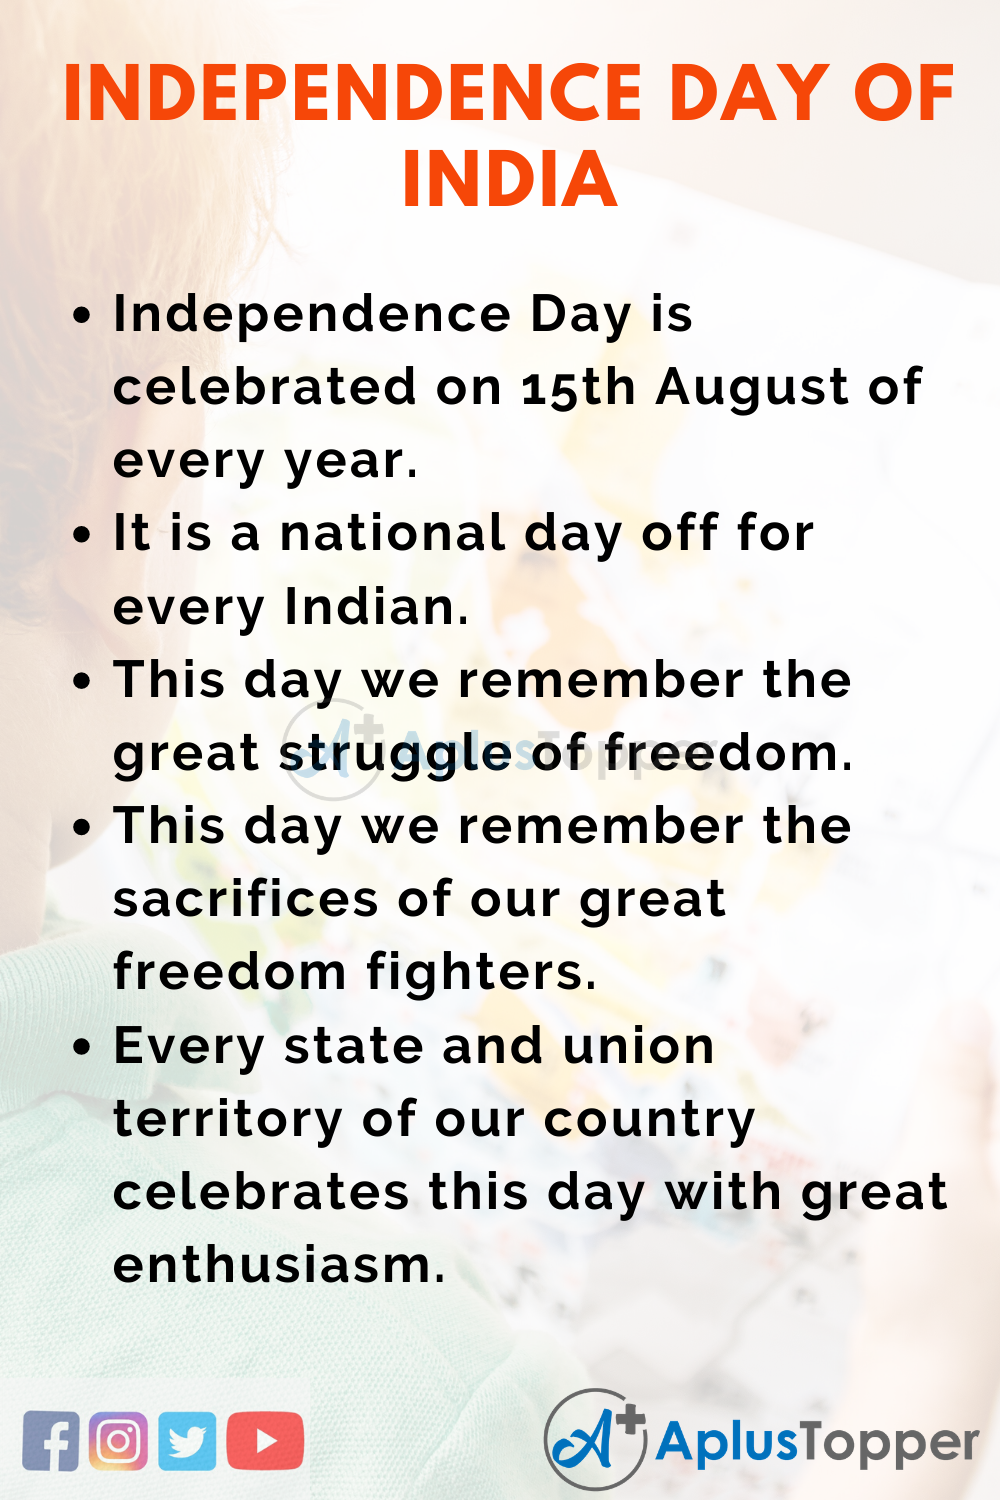 hindi essay on independence day